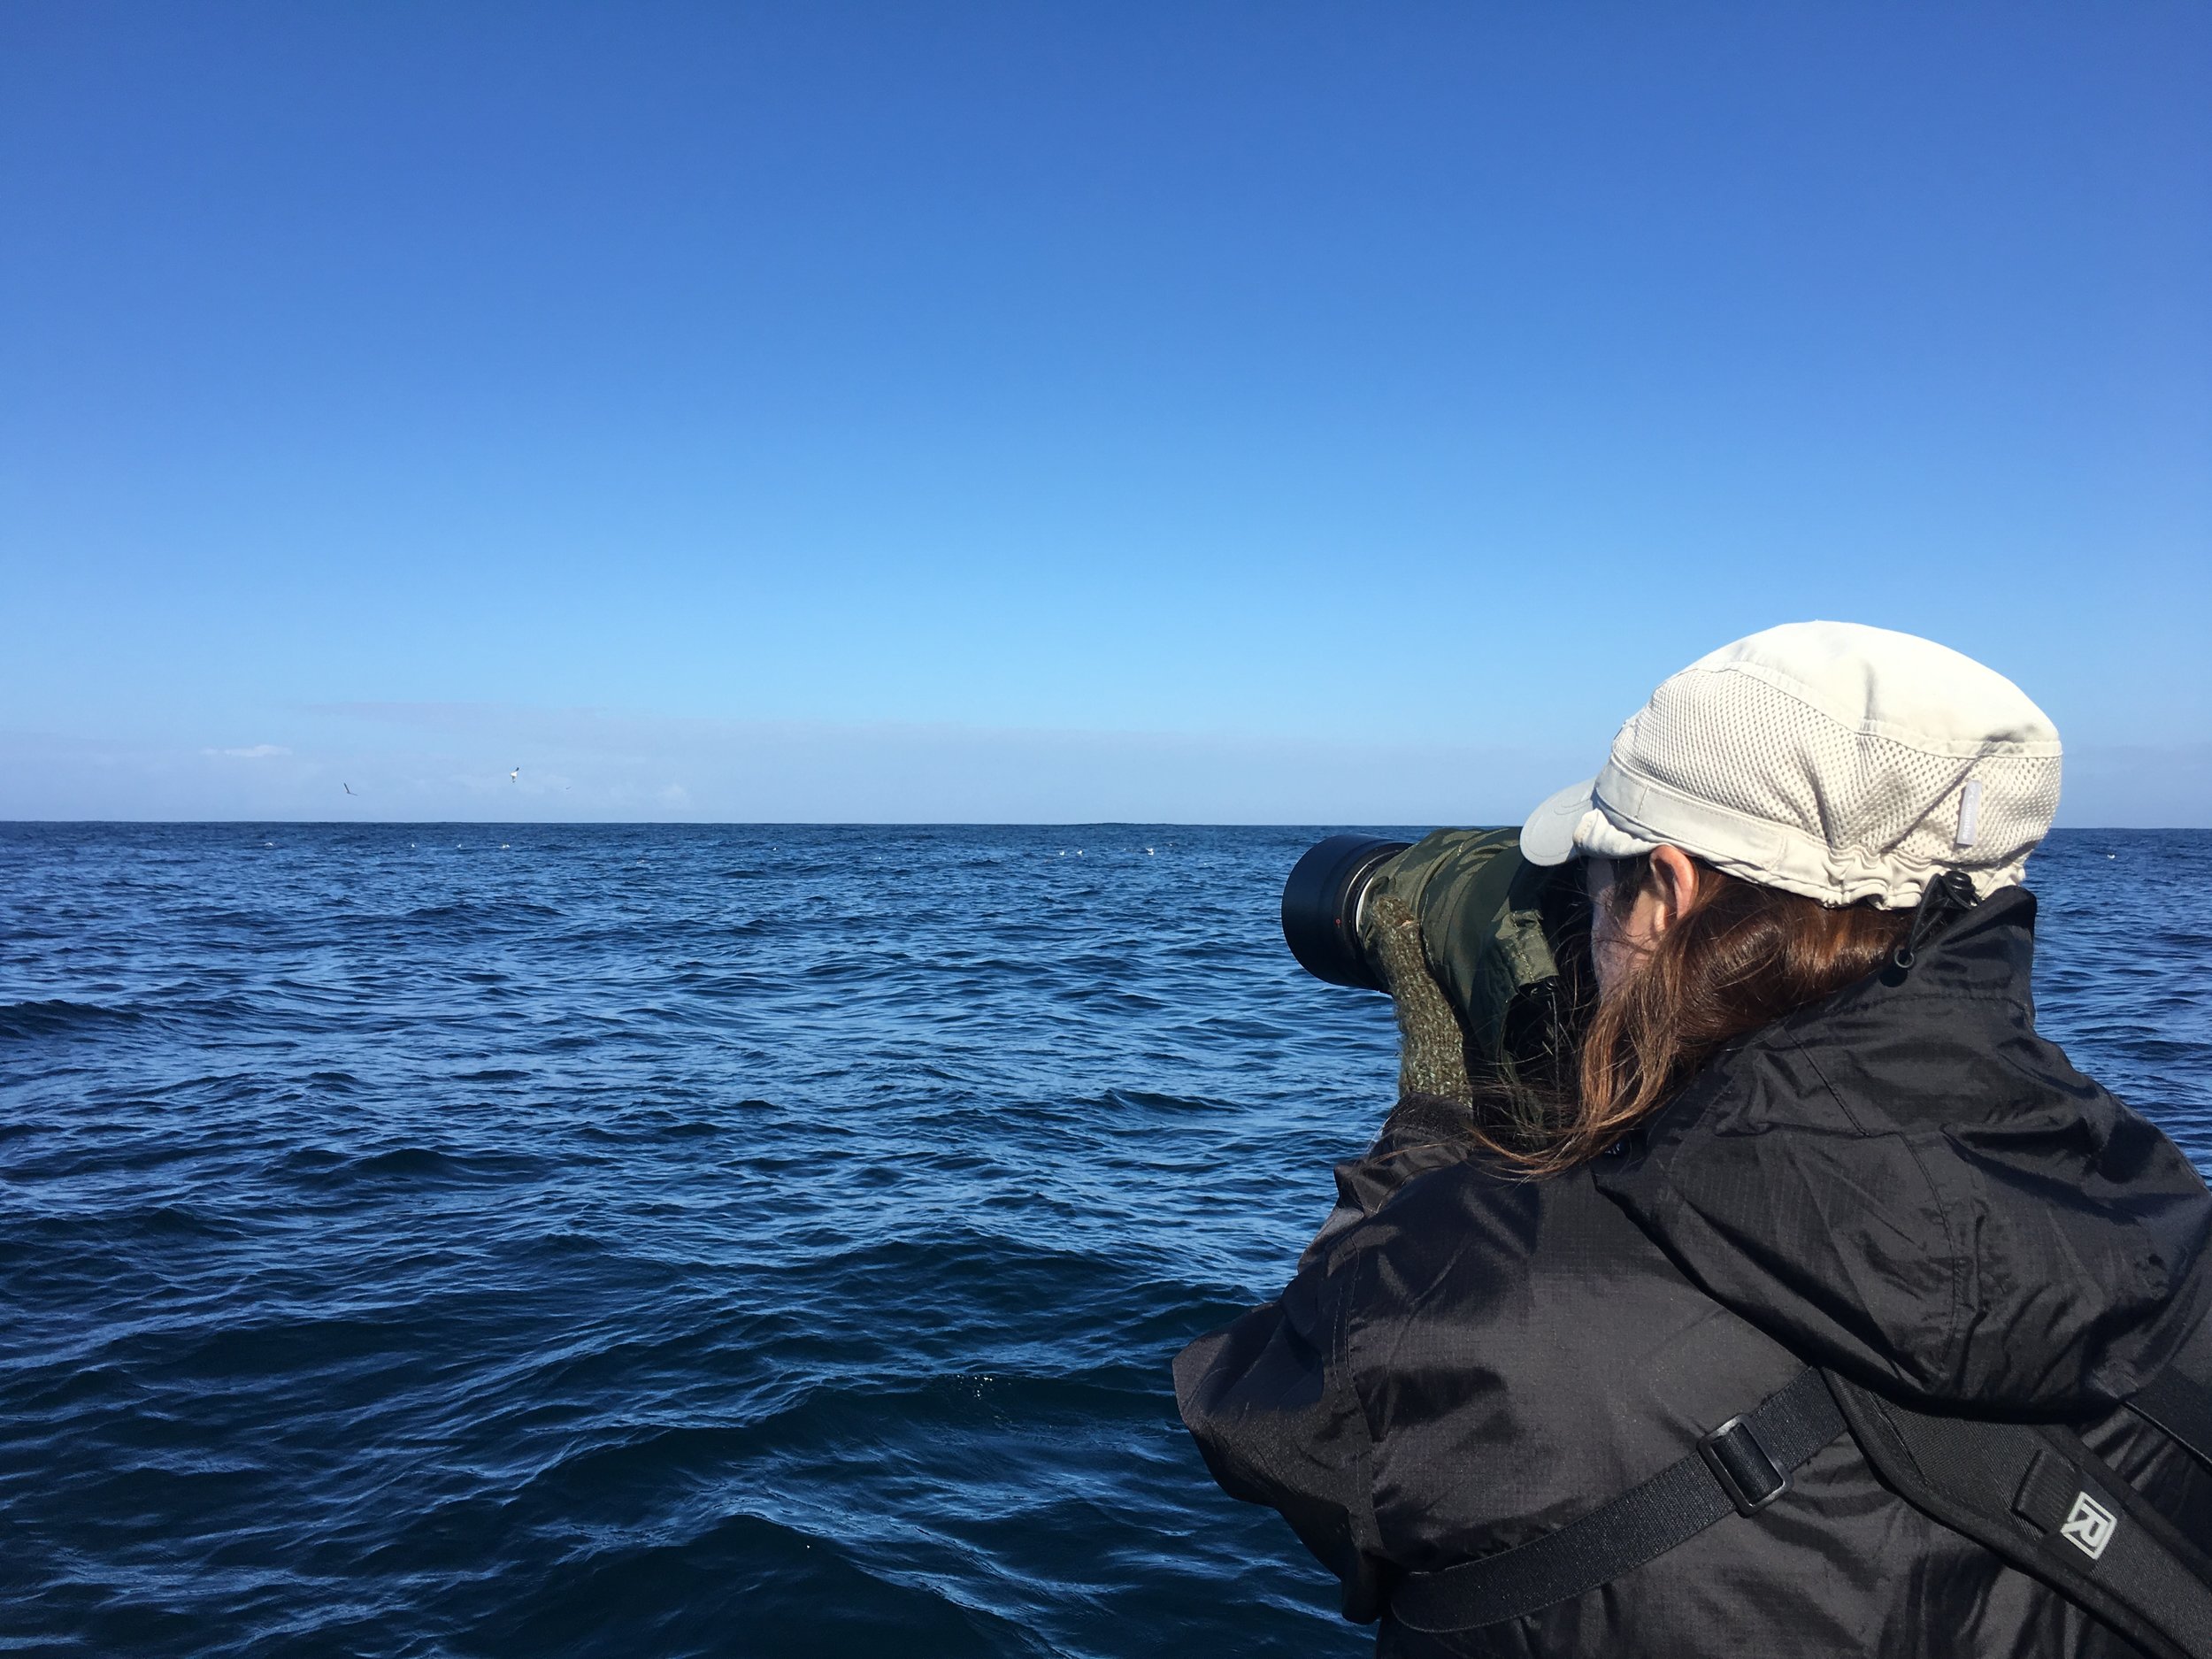  Pelagic Tour participants spotted 12 off-shore species on the tour, as well as a Humpback whale.  Photo by Lila Bowen 